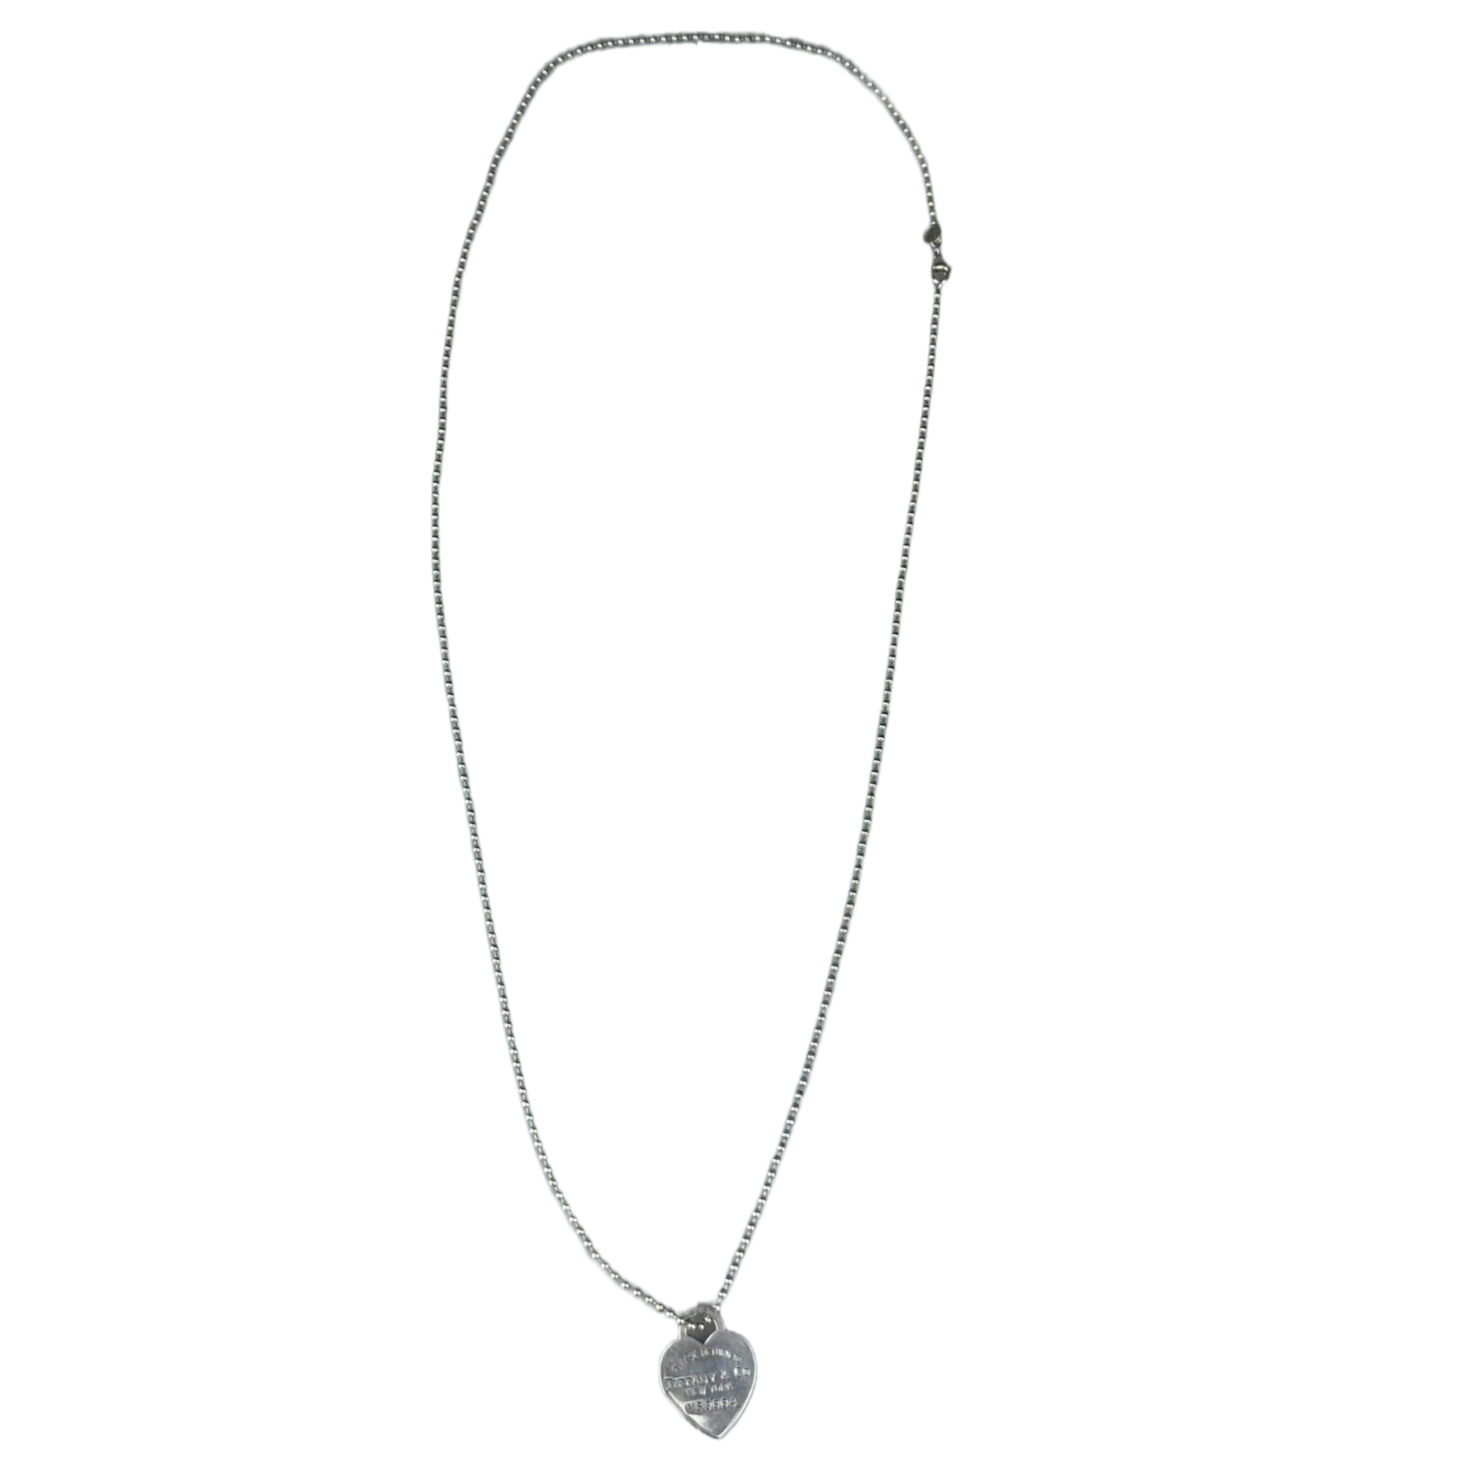 Tiffany & Co Return to Tiffany Heart Tag Long Beaded Necklace Sterling Silver